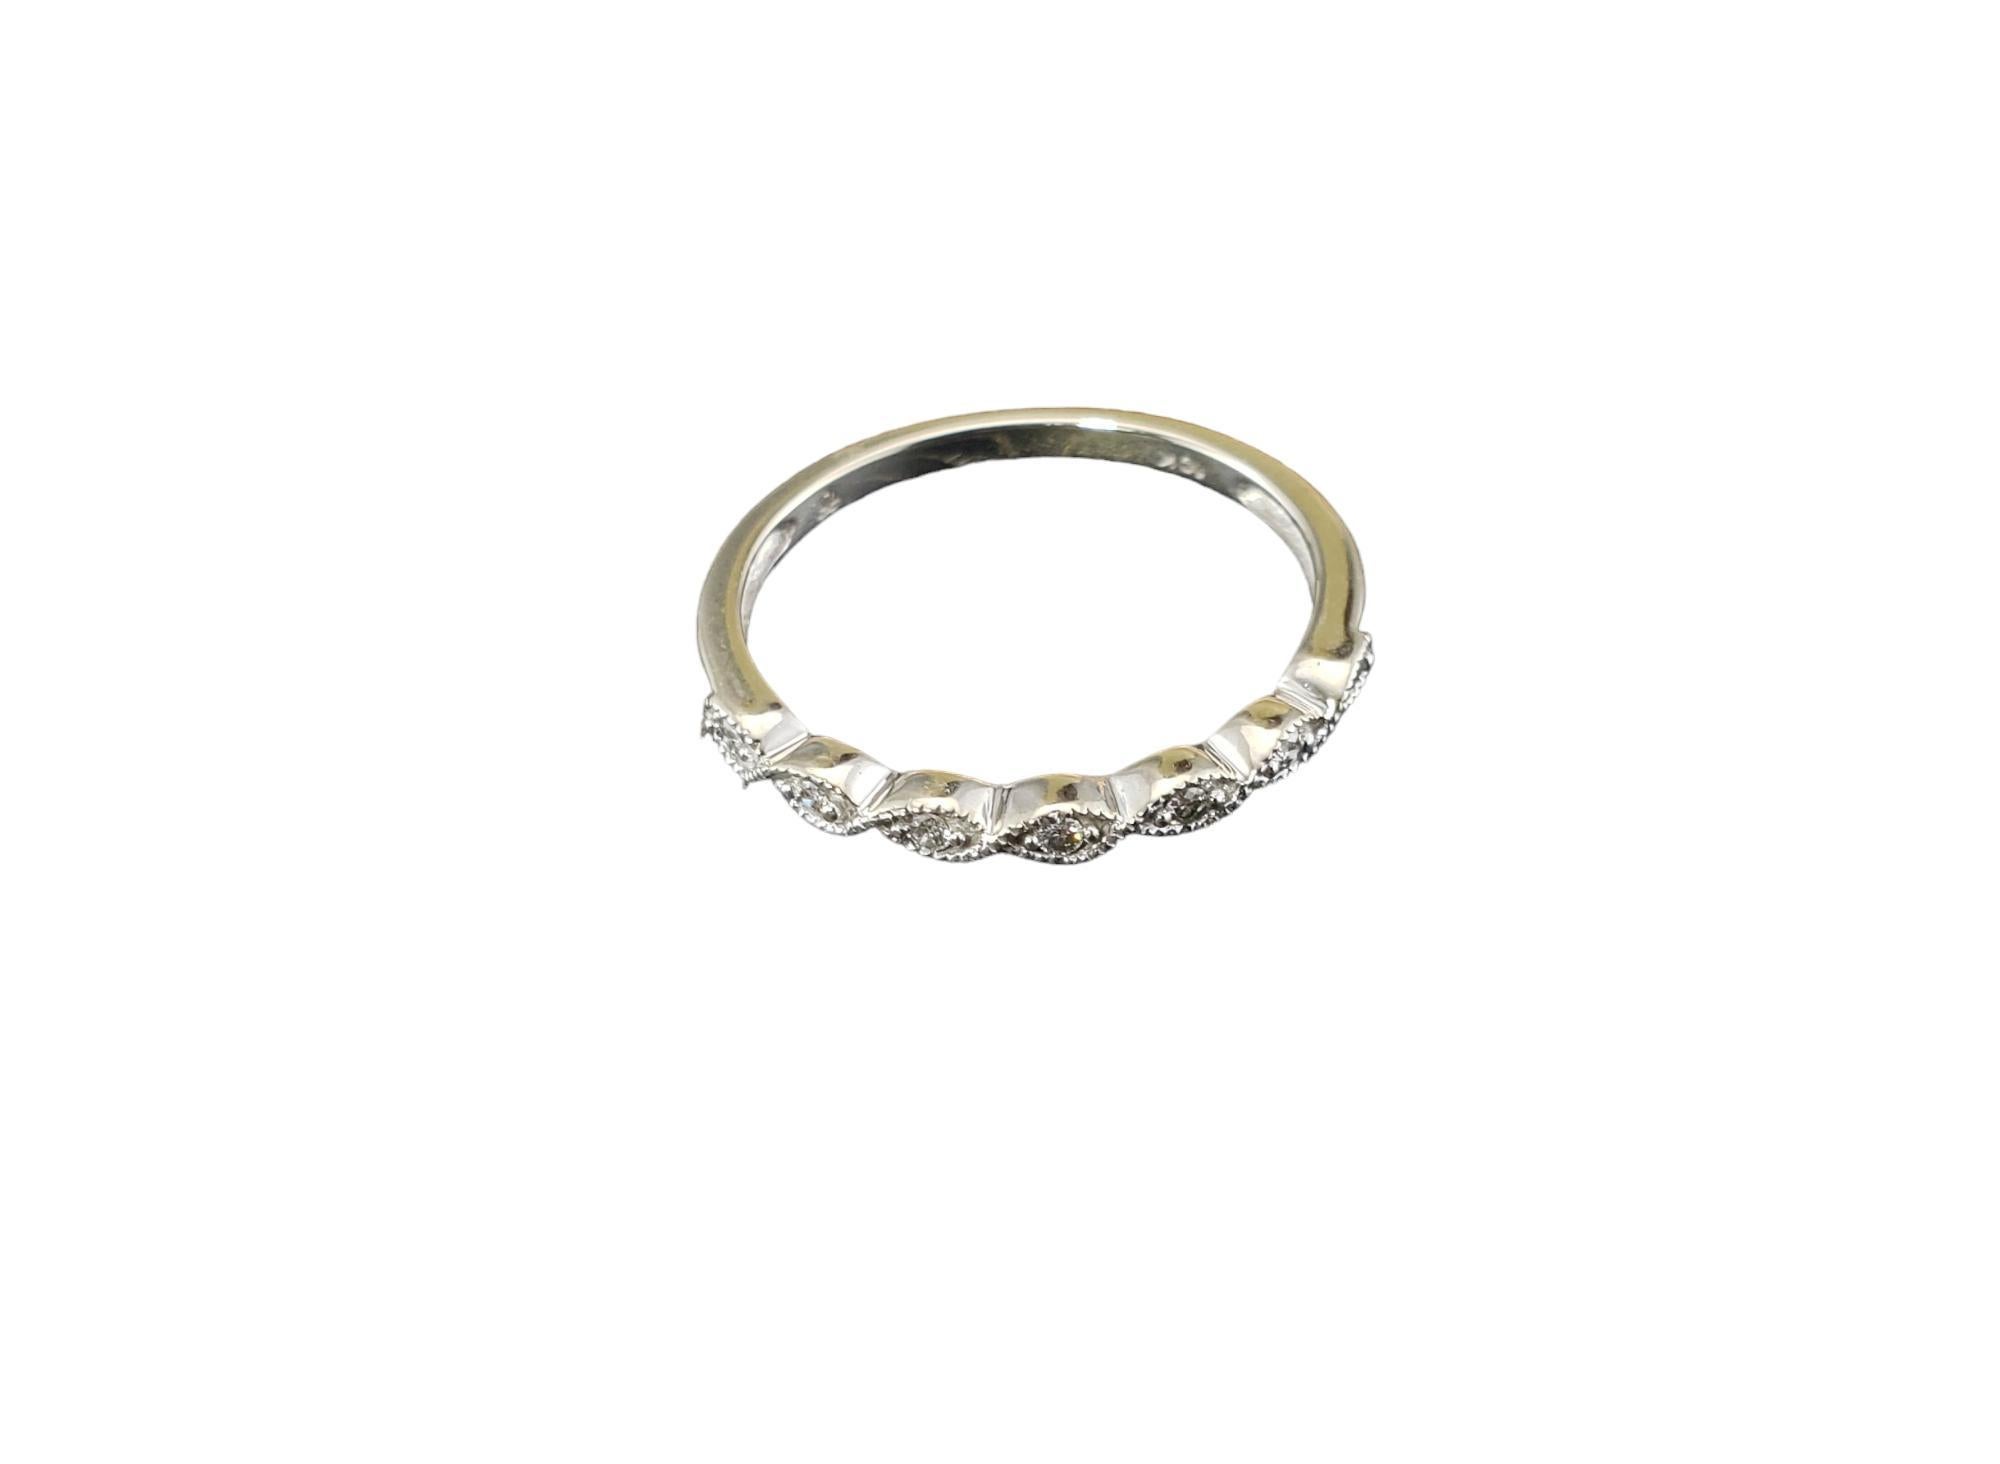 Vintage 10K White Gold Diamond Band Ring Size 7-

This elegant band features seven round brilliant cut diamonds set in meticulously detailed 10K white gold.
Width: 2 mm.

Approximate total diamond weight: .05 ct.

Diamond color: I

Diamond clarity: